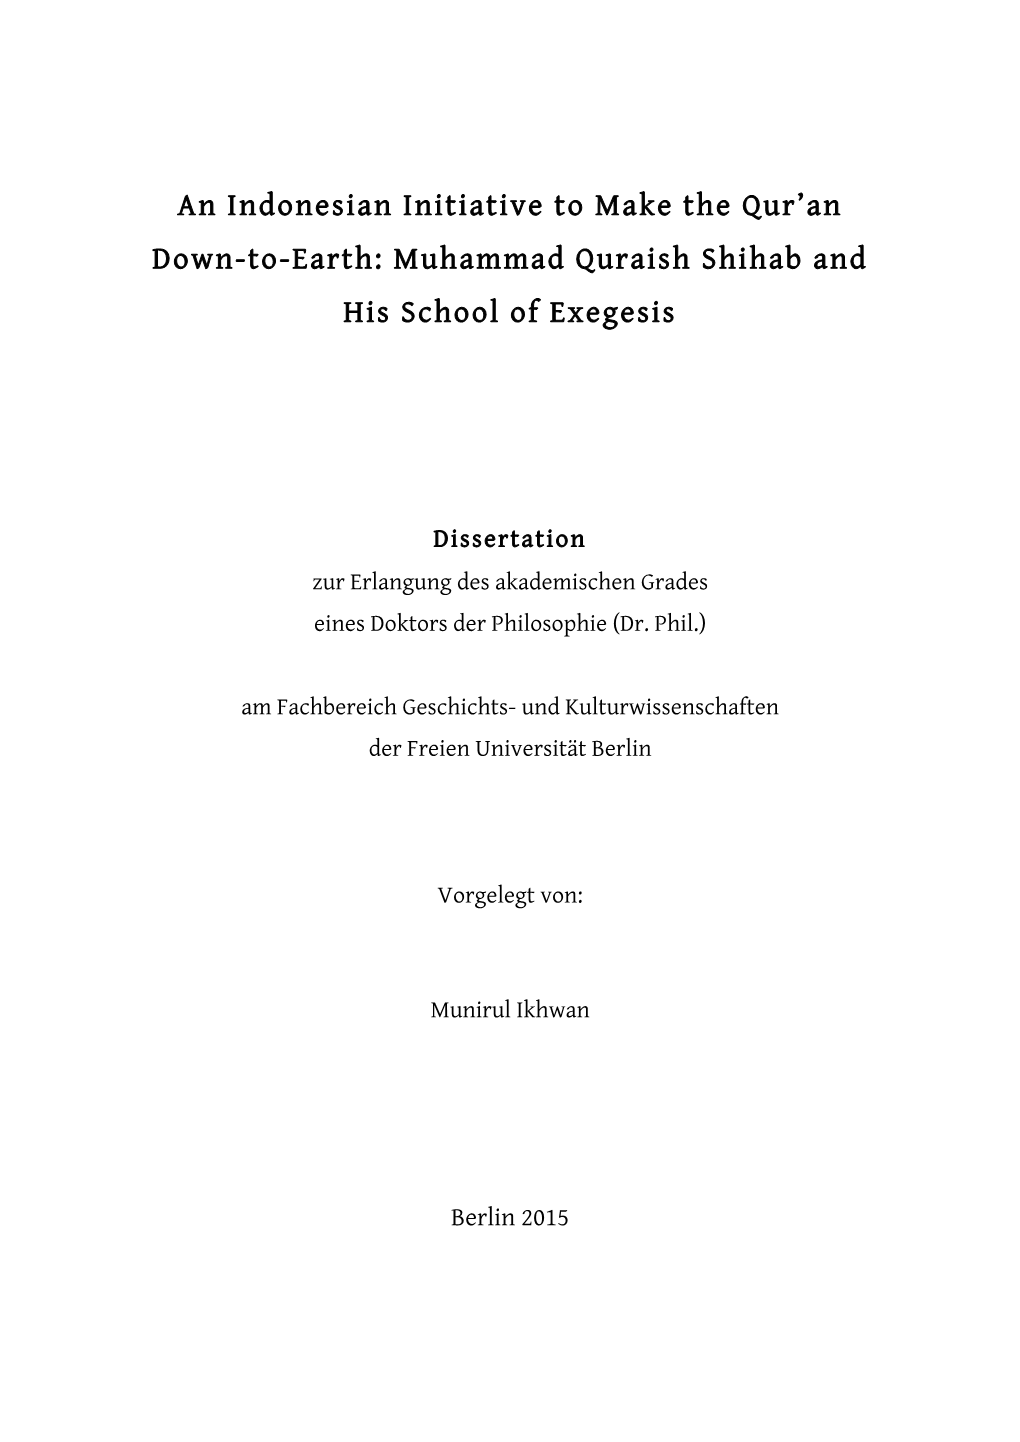 Dissertation an Indonesian Initiative to Make the Qur'an Down-To-Earth